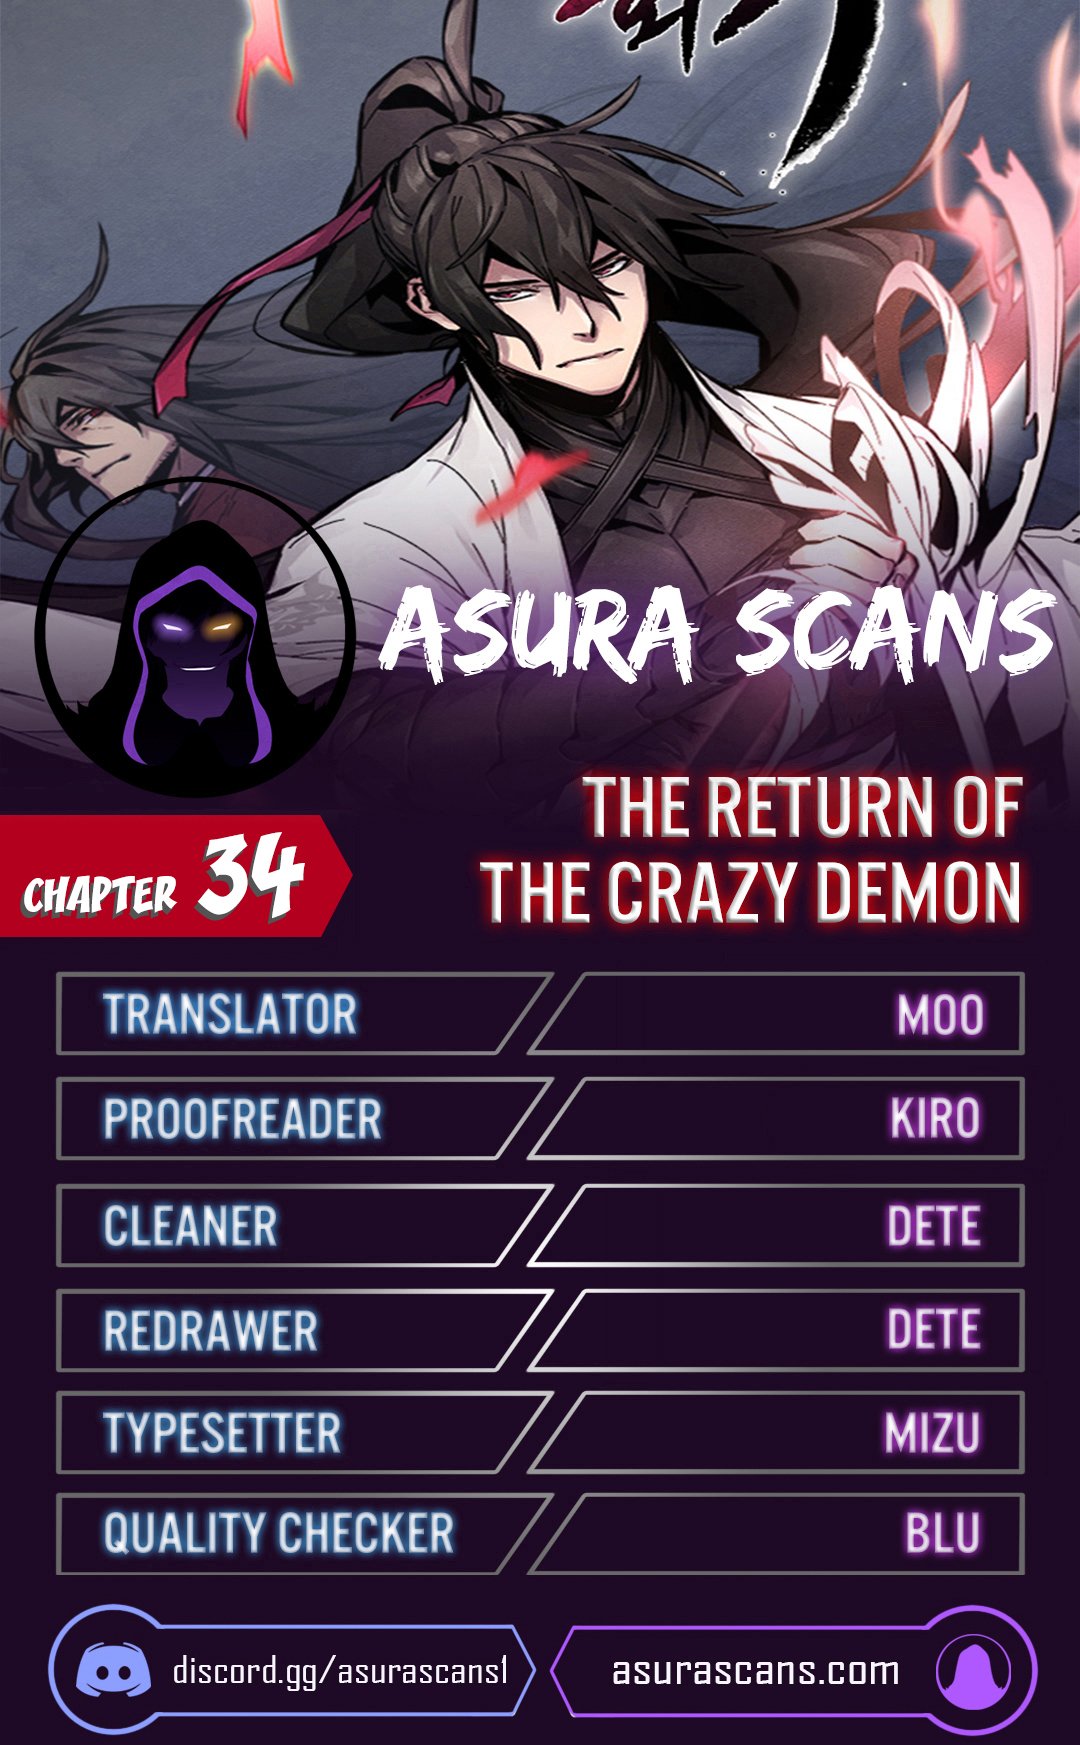 The Return of the Crazy Demon - Chapter 18575 - Image 1